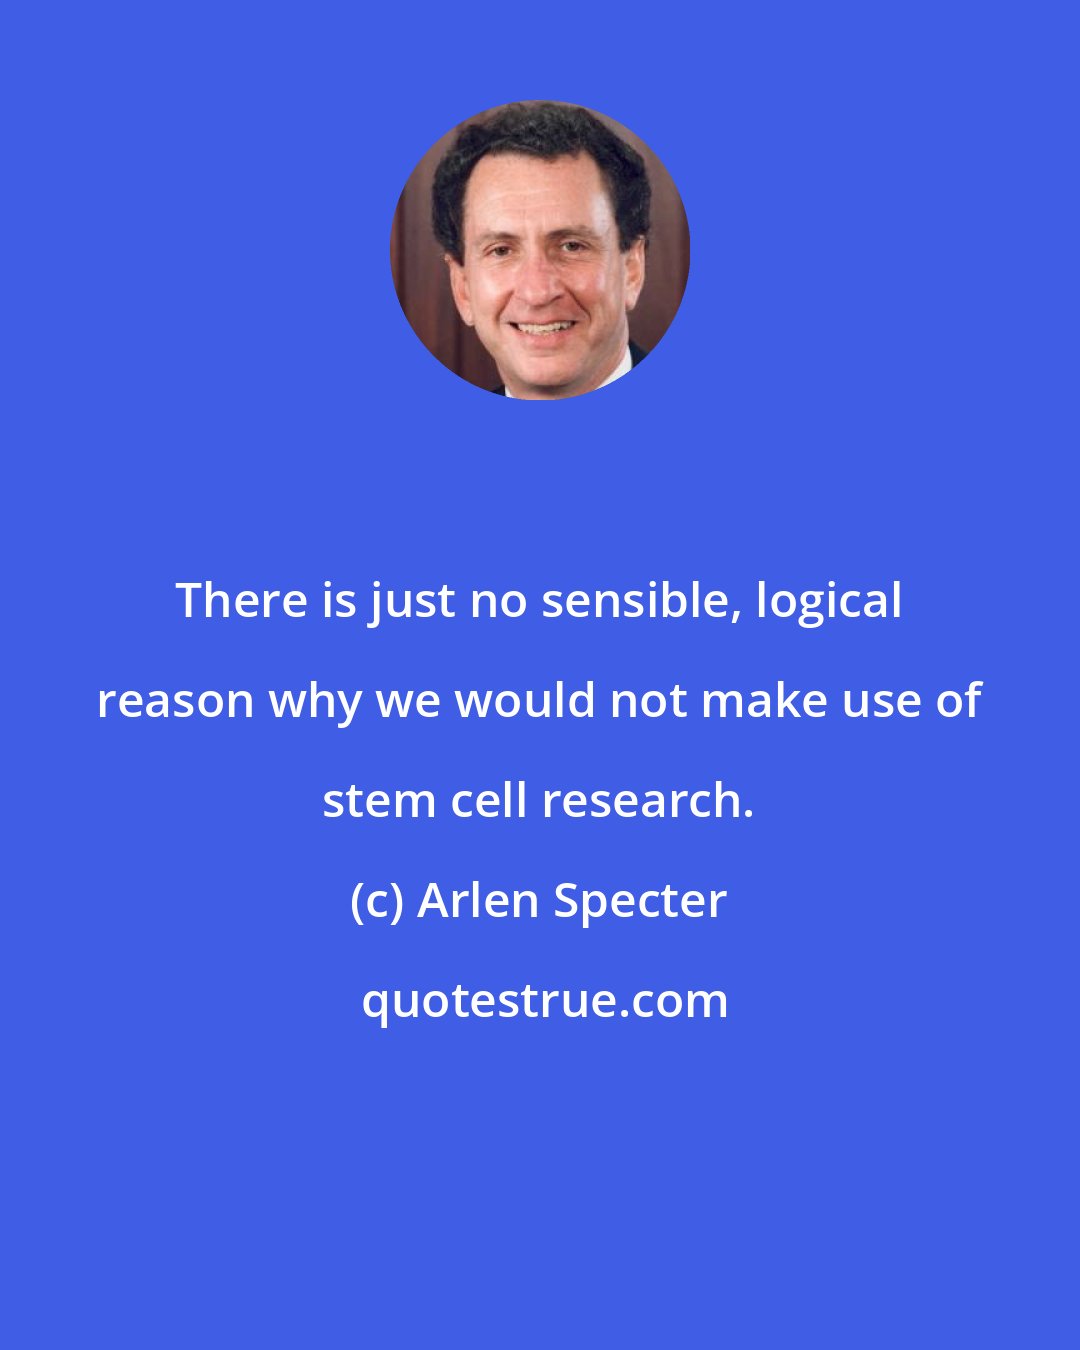 Arlen Specter: There is just no sensible, logical reason why we would not make use of stem cell research.